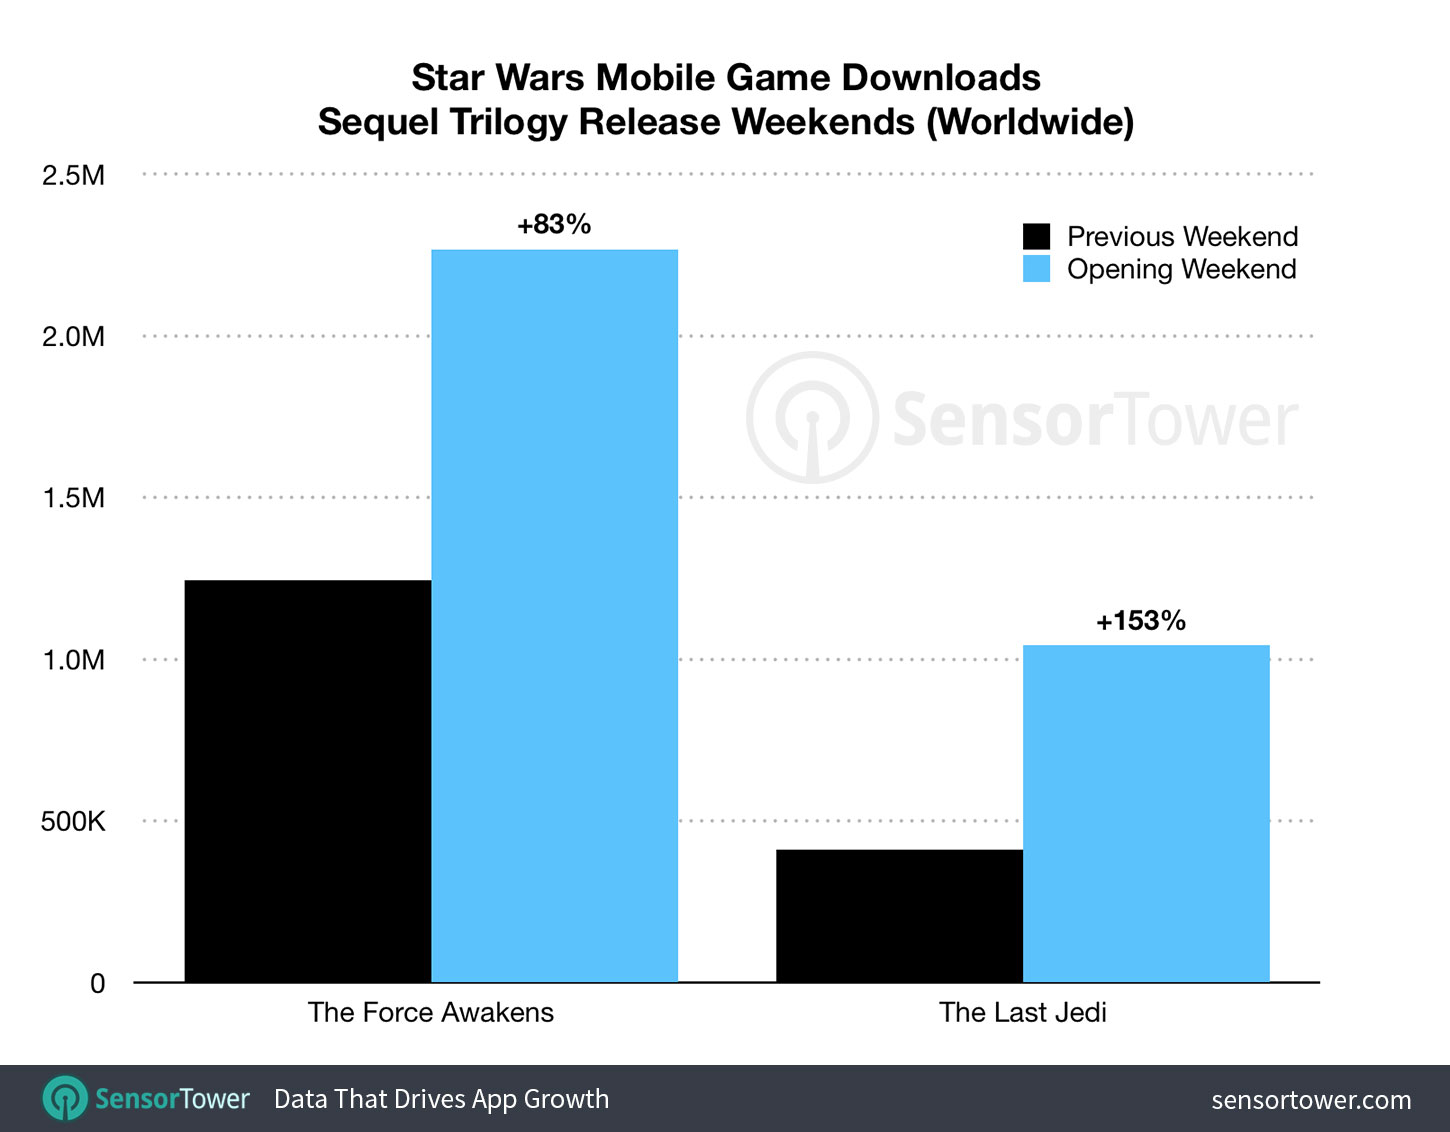 The Last Jedi' Premiere More Than Doubled Star Wars Mobile Game Downloads